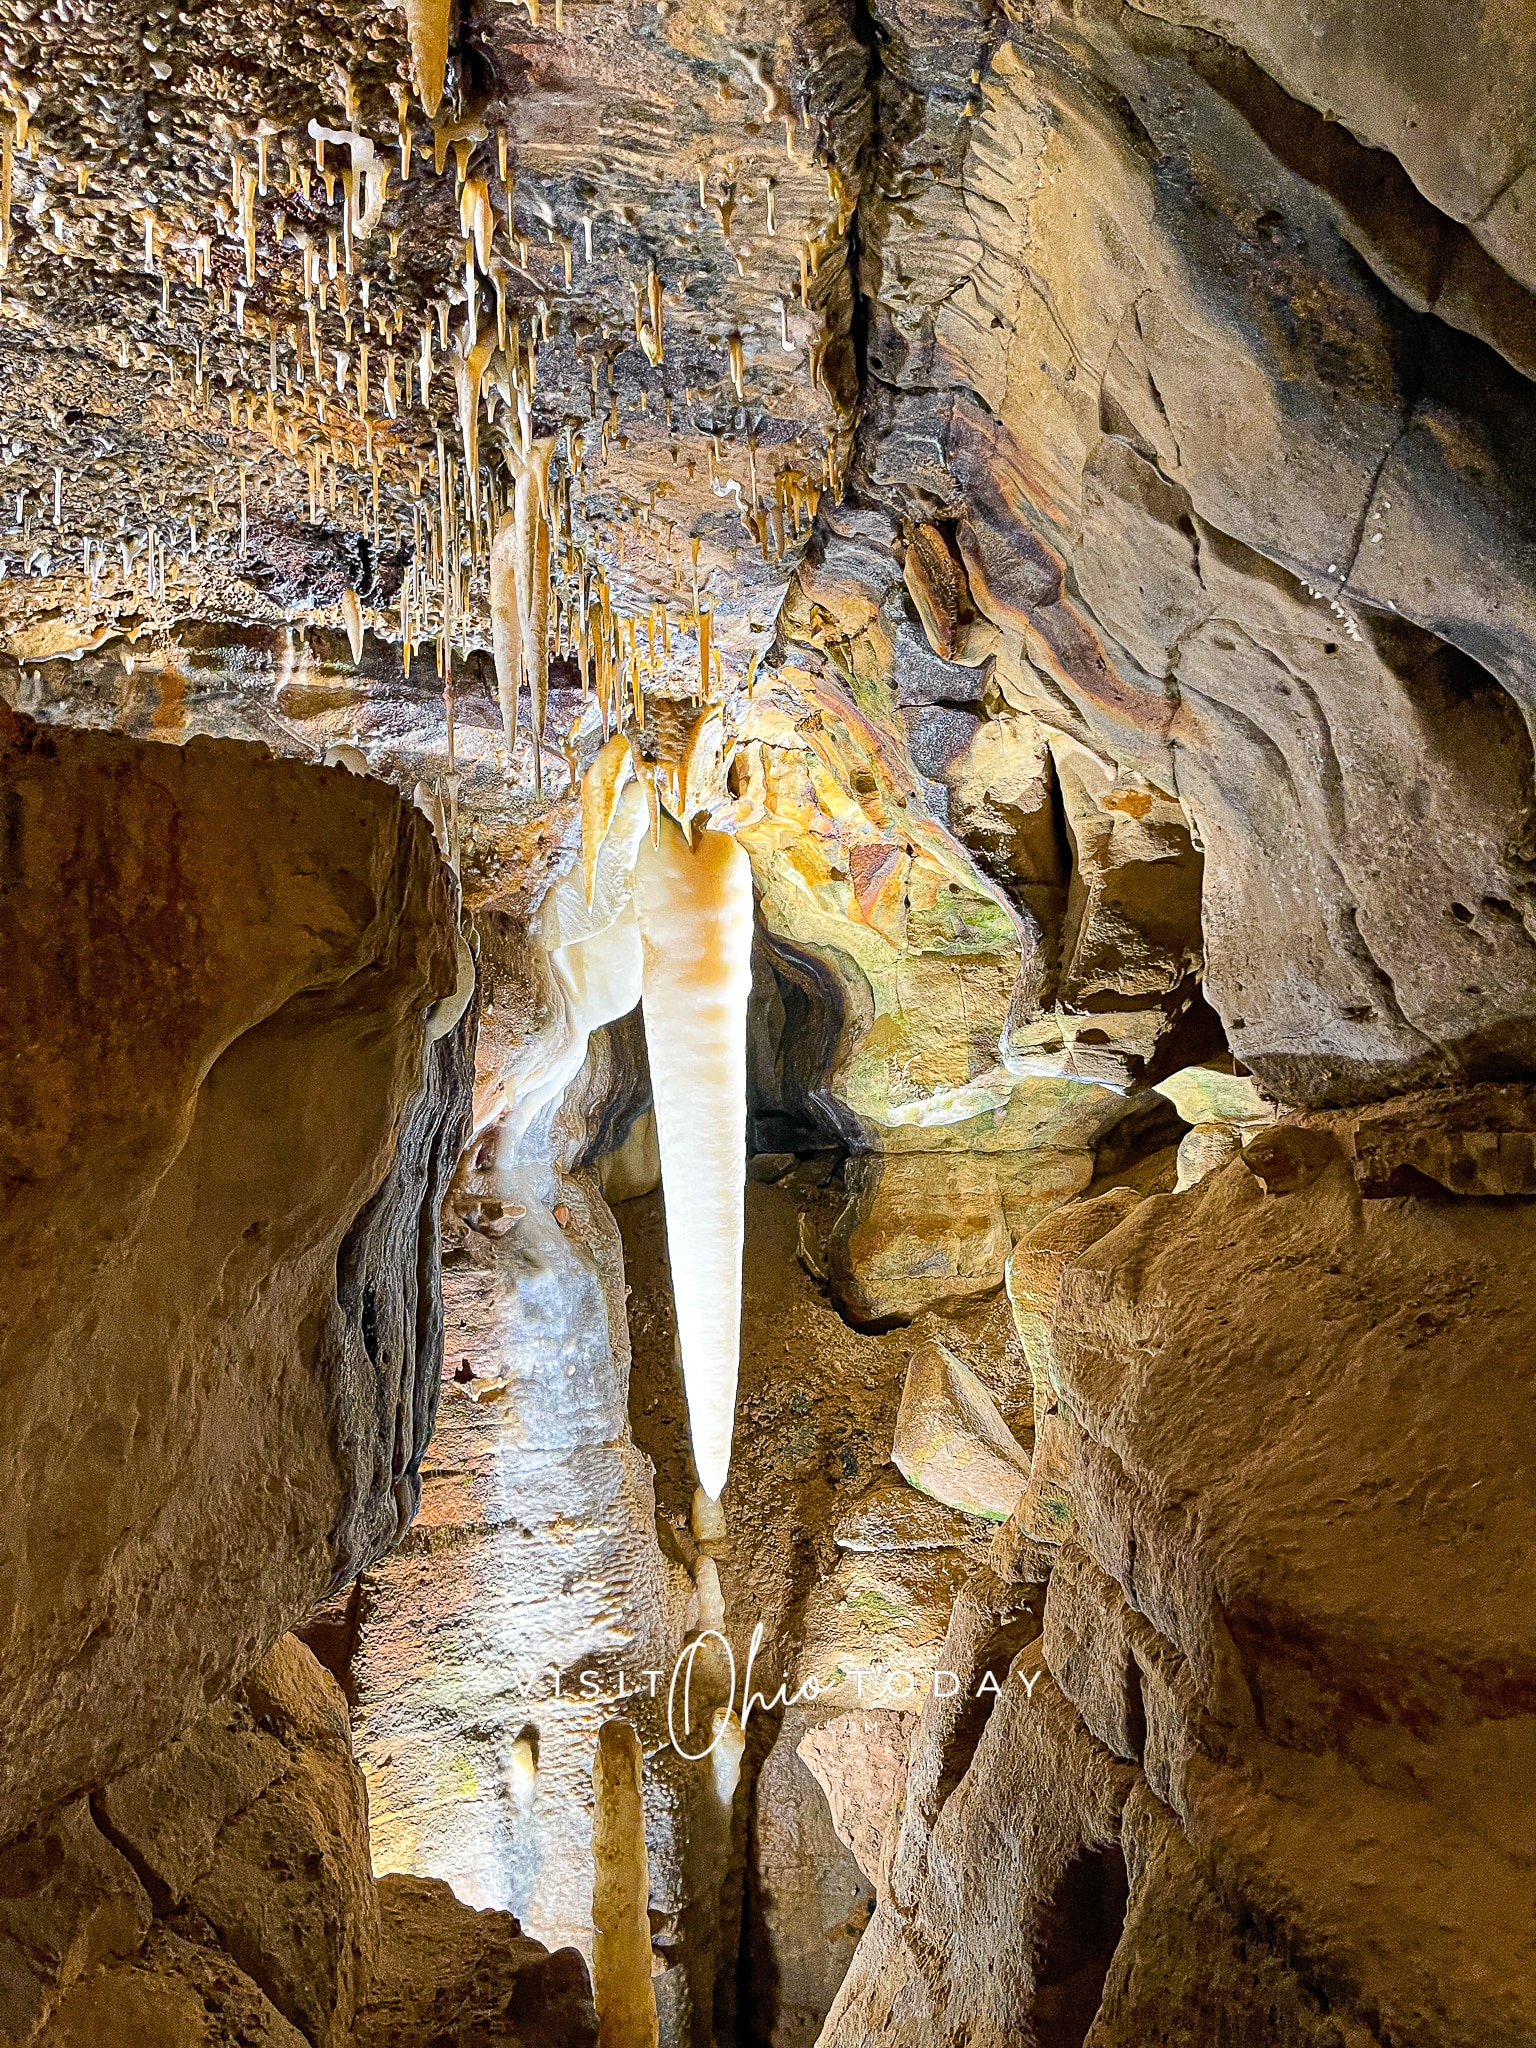 vertical photo of the ohio caverns, showing stalagmites and stalactites and beautifully colorful rock formations